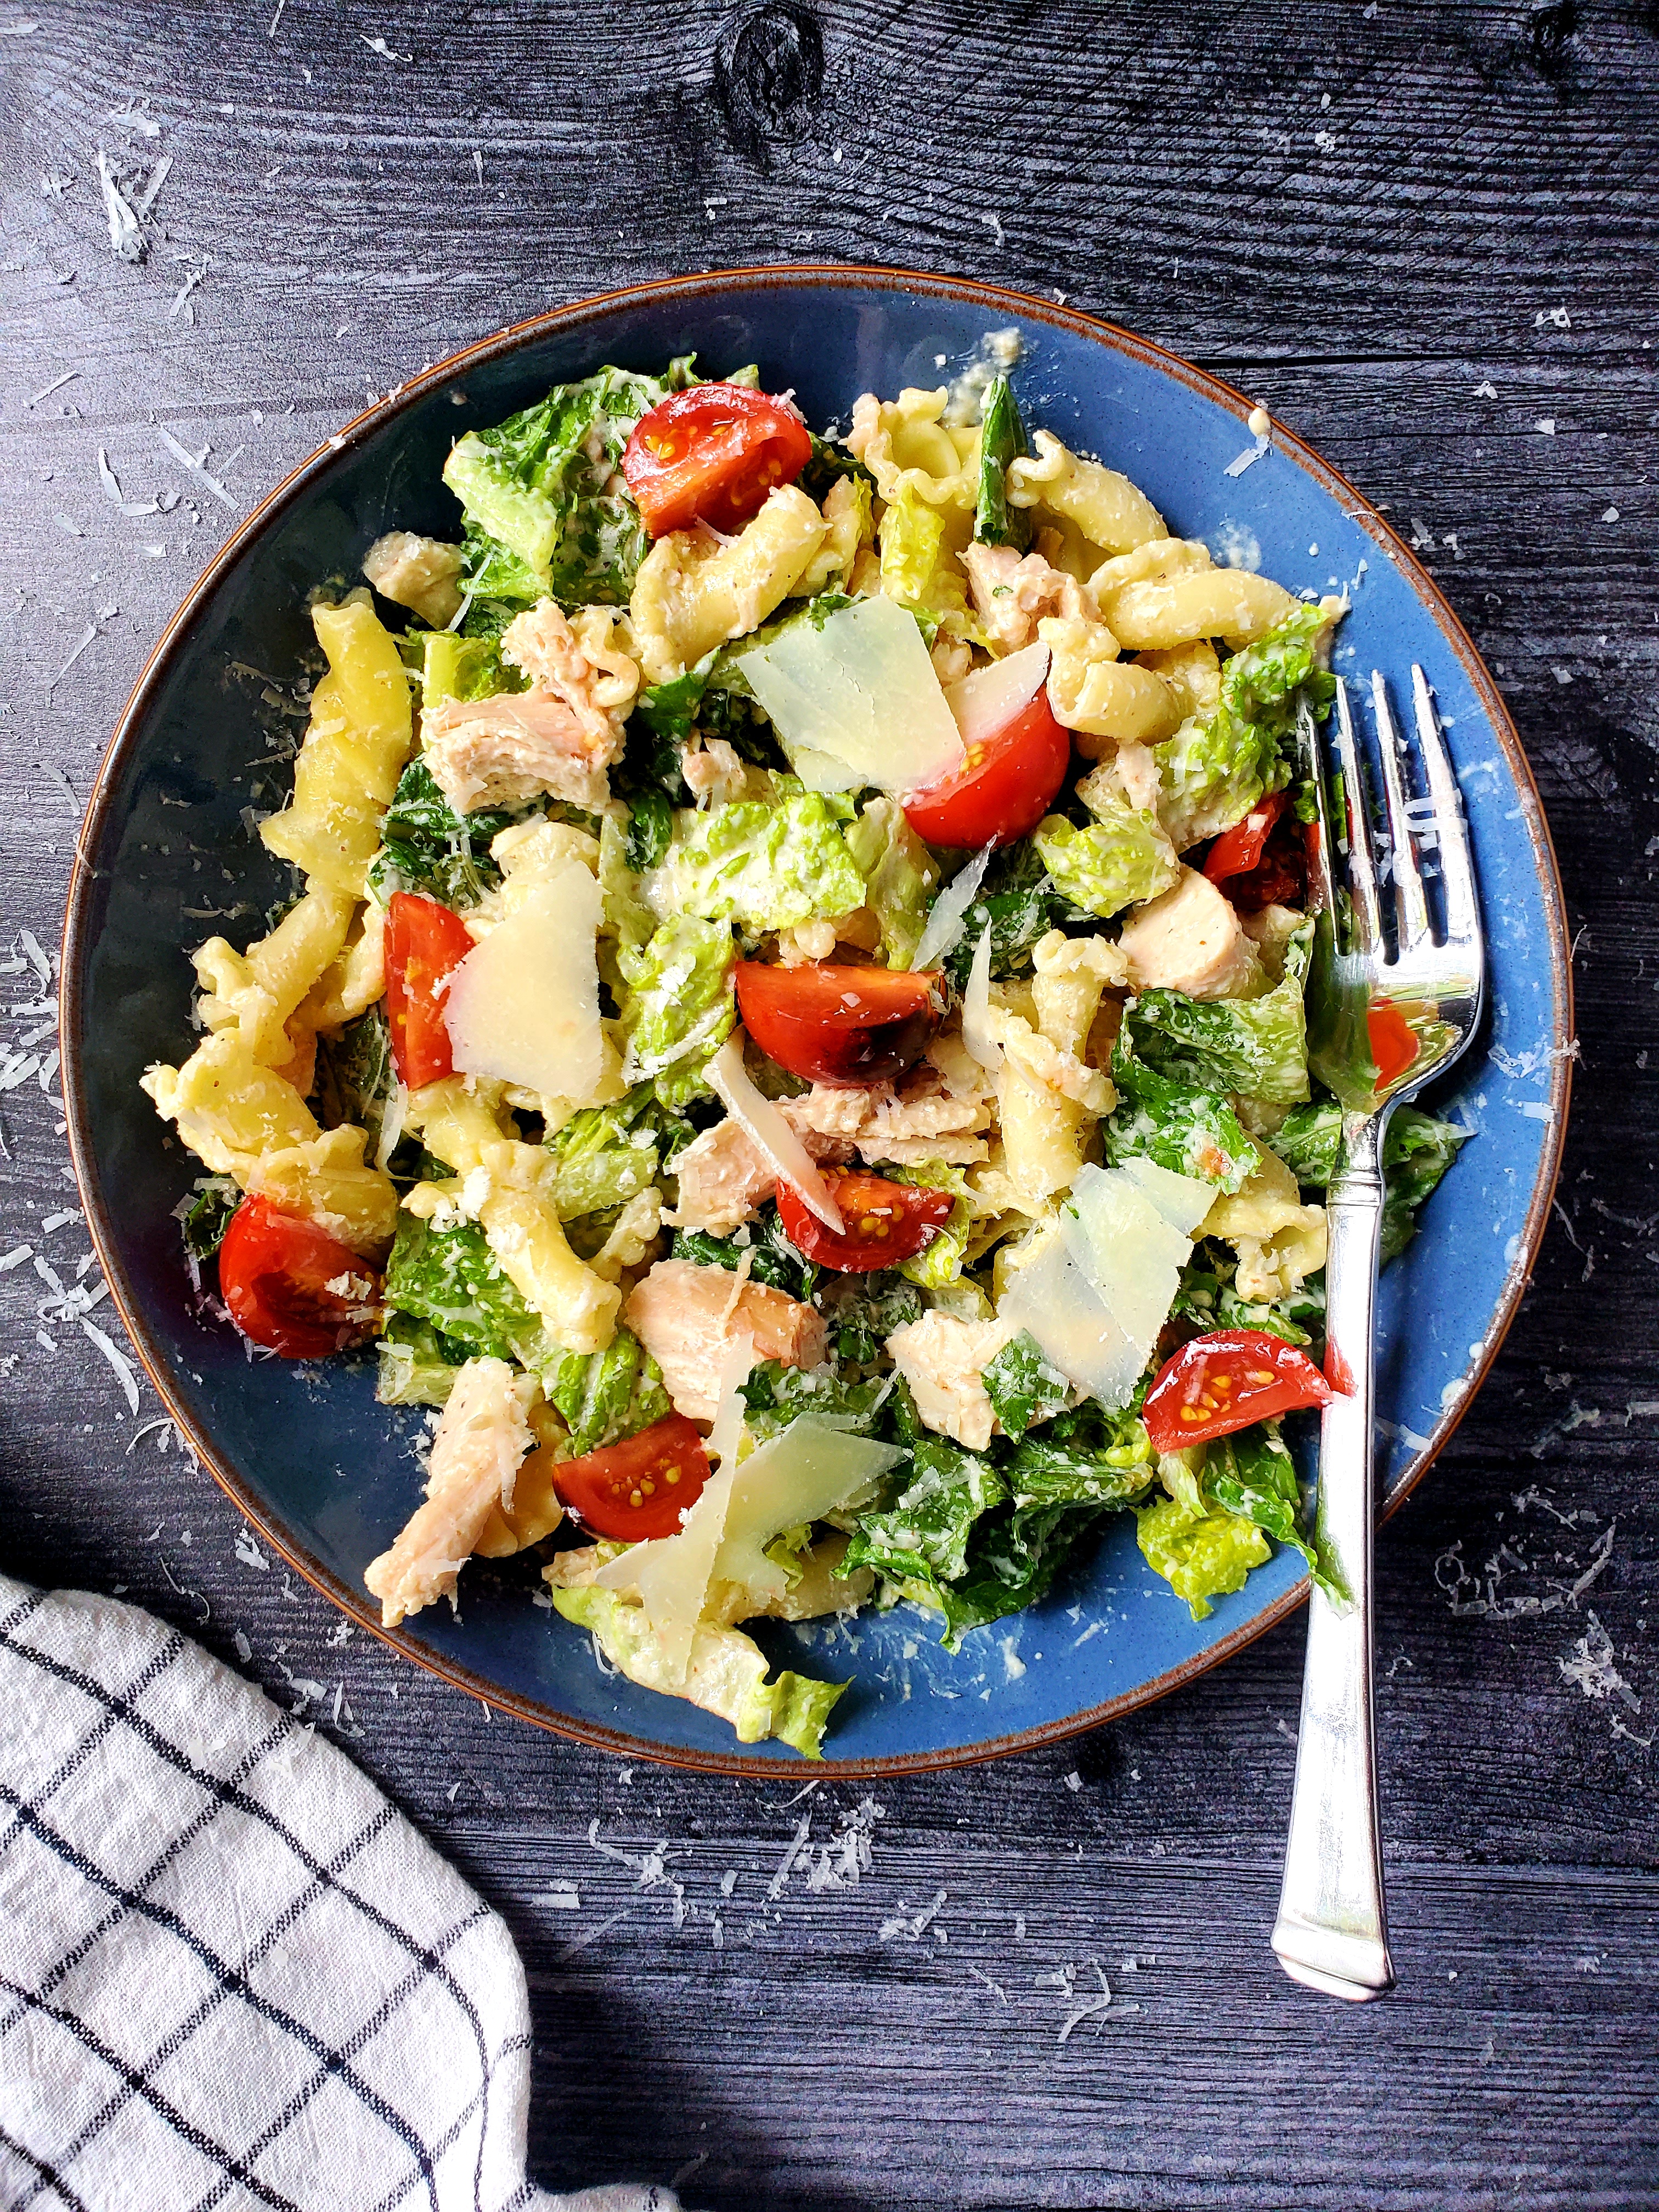 Chicken Caesar Pasta Salad (Recipe Inspired by THE CLOISTERS)